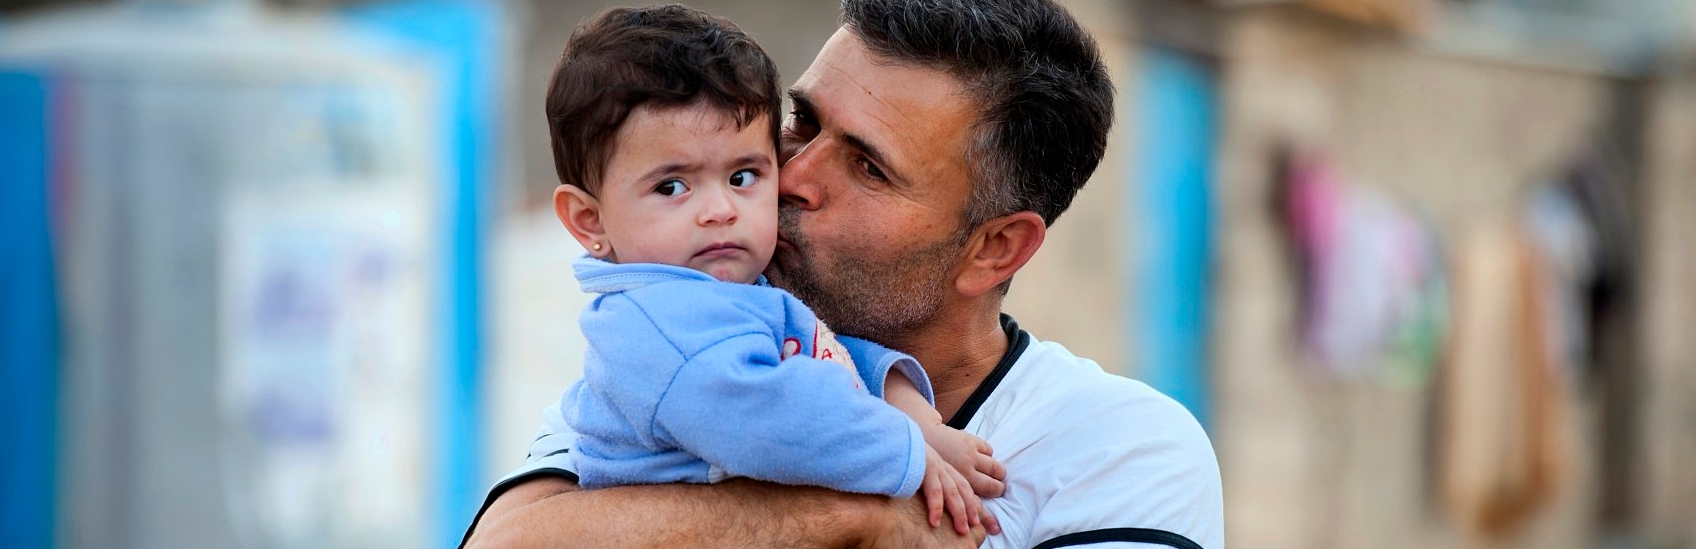 A fourteen month-old boy get a kiss from his father at a refugee camp. Hundreds of thousands of refugees and internally displaced families have fled the violence across Iraq and Syria. Children in Iraq have often witnessed or experienced violence, and left their homes in terrifying circumstances. Many now face hot summers and freezing winters living in tents, half built apartment blocks and public buildings. Save the Children is providing essential goods to families, such as water and hygiene kits, as well as building sanitation facilities and running child friendly spaces and education classes. Photo credit: Sebastian Rich/Save the Children, October 2014.